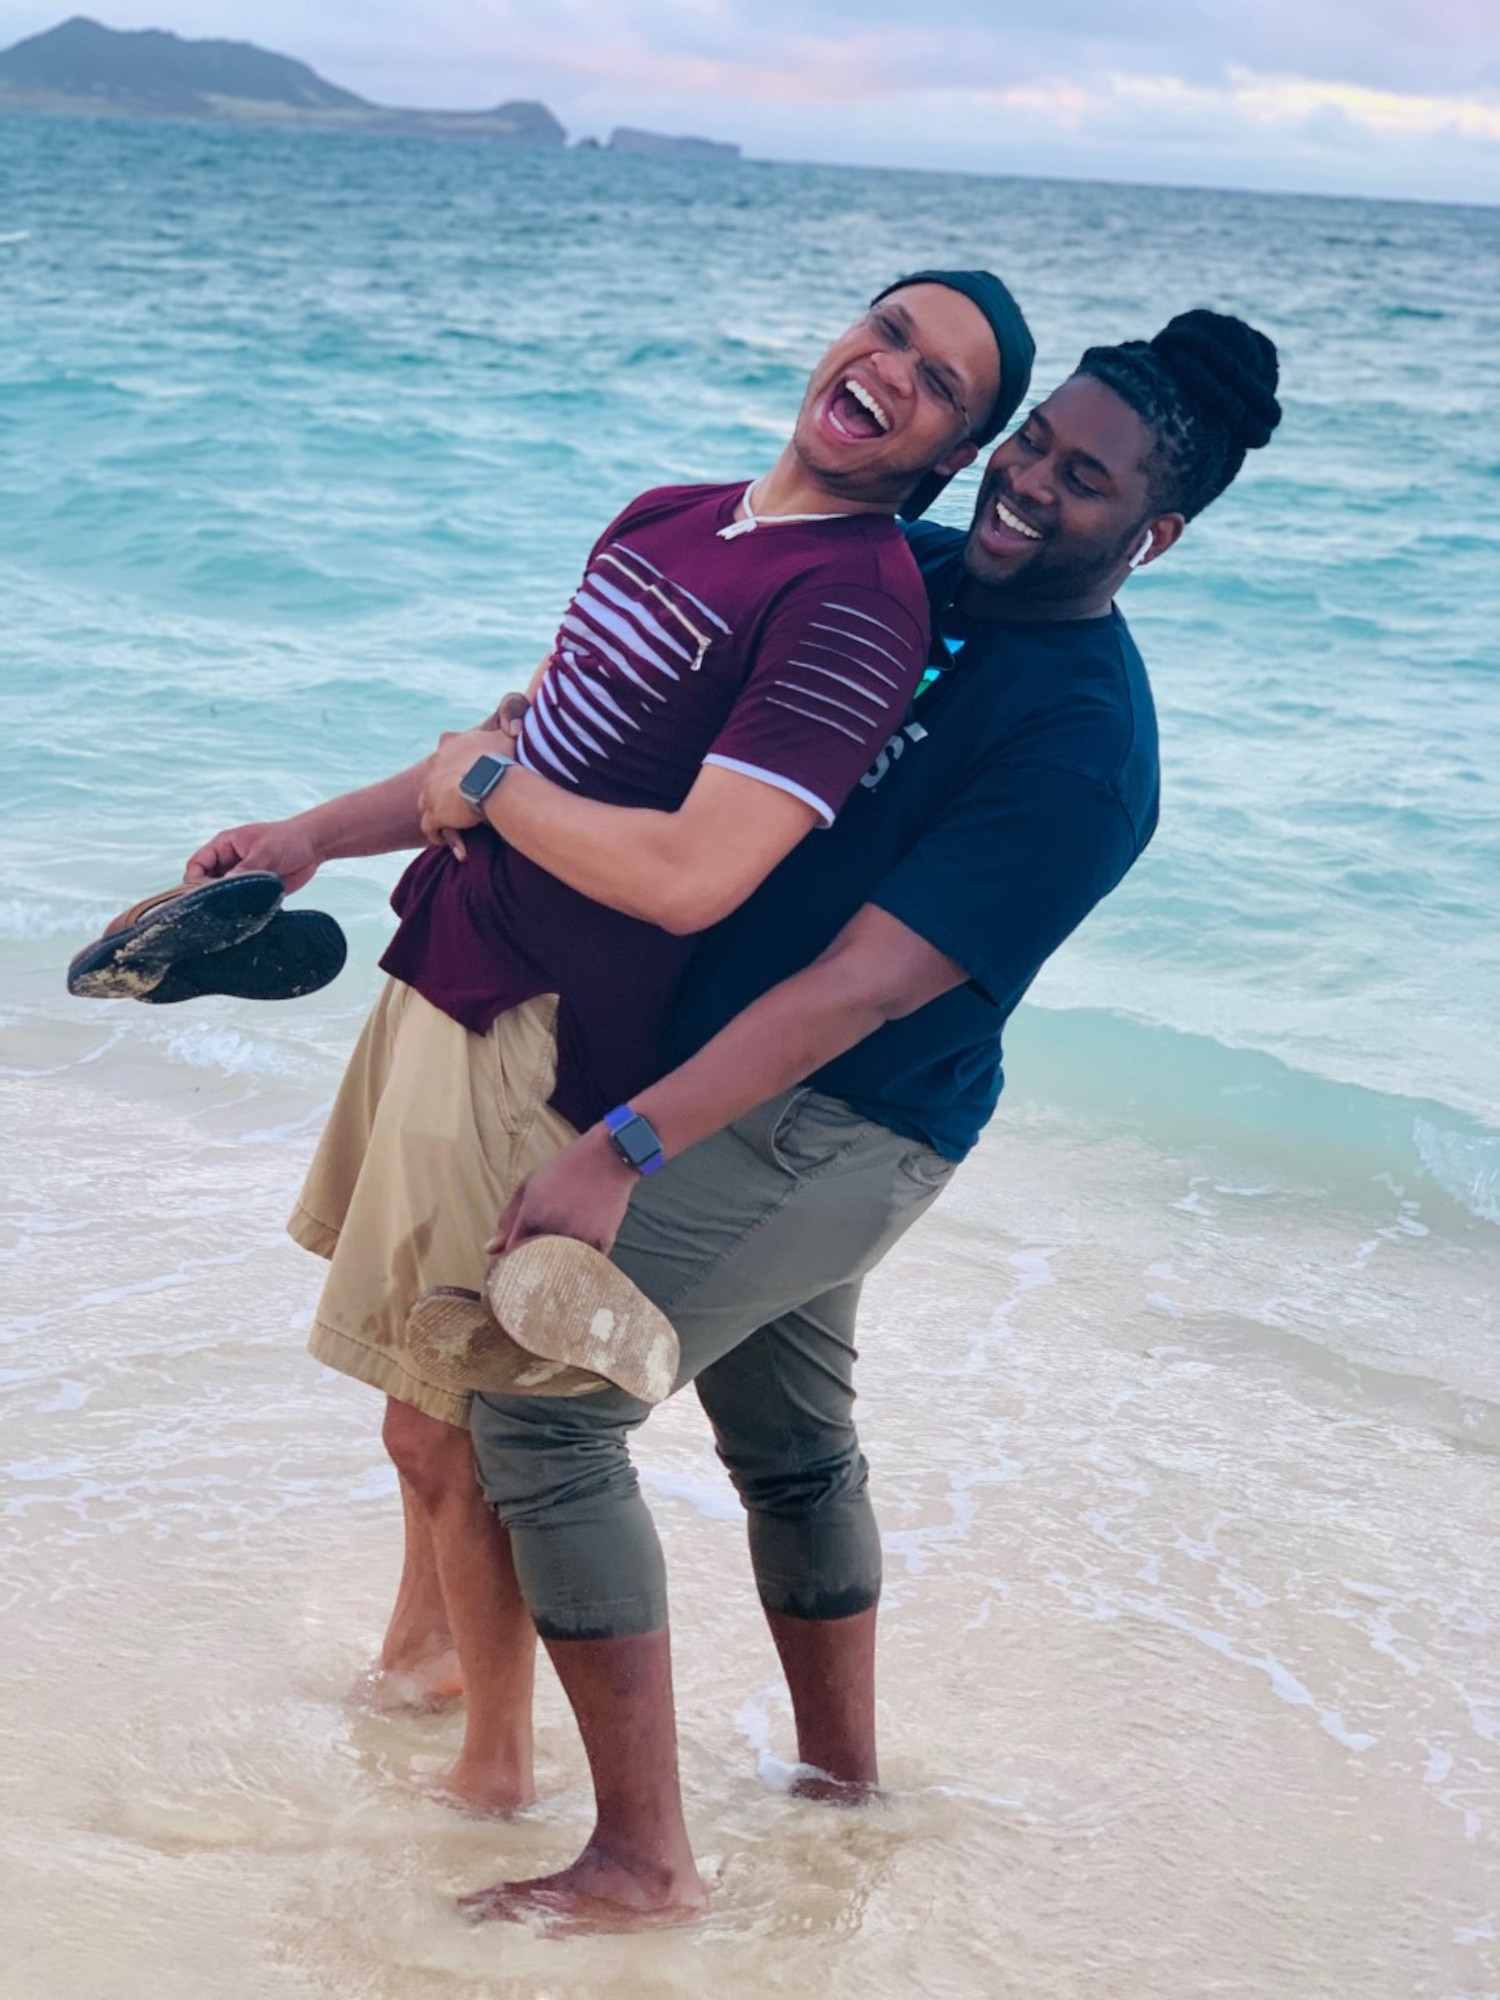 Mario and Monte Foreman-Powell pose for a photo together on vacation.